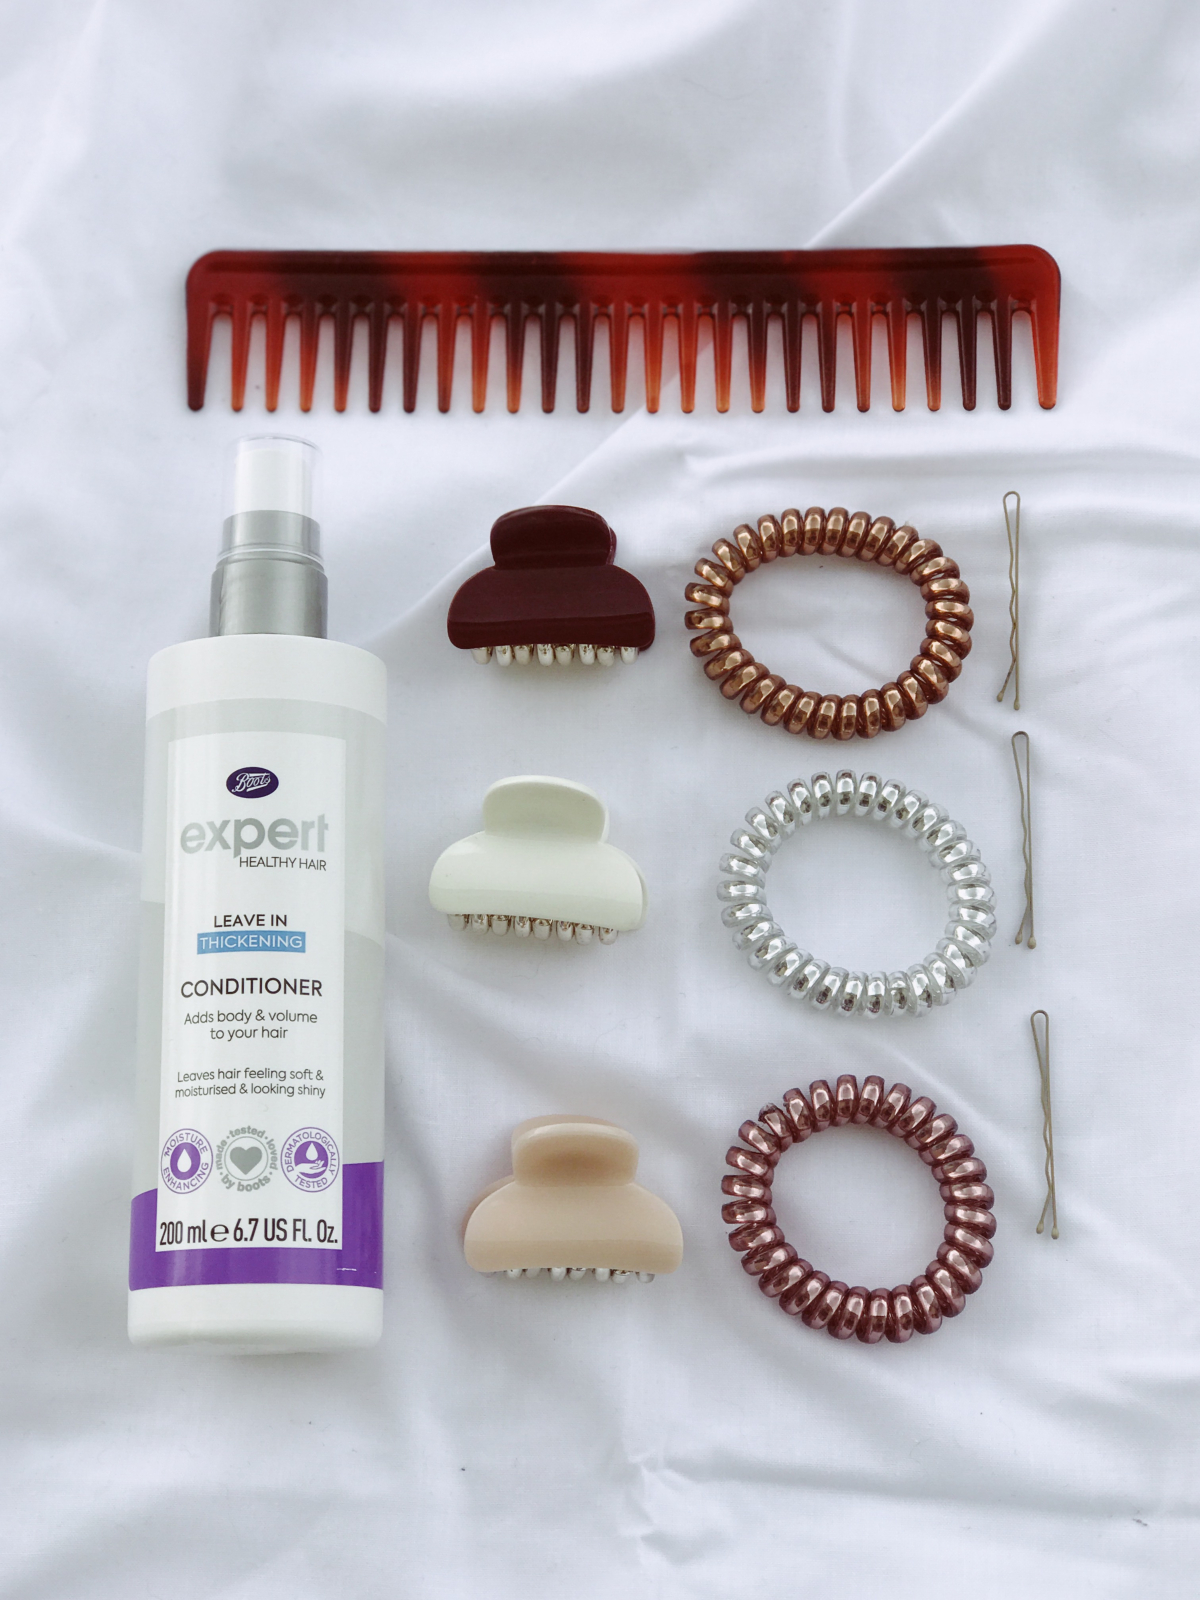 Boots Own Brand Haircare Review